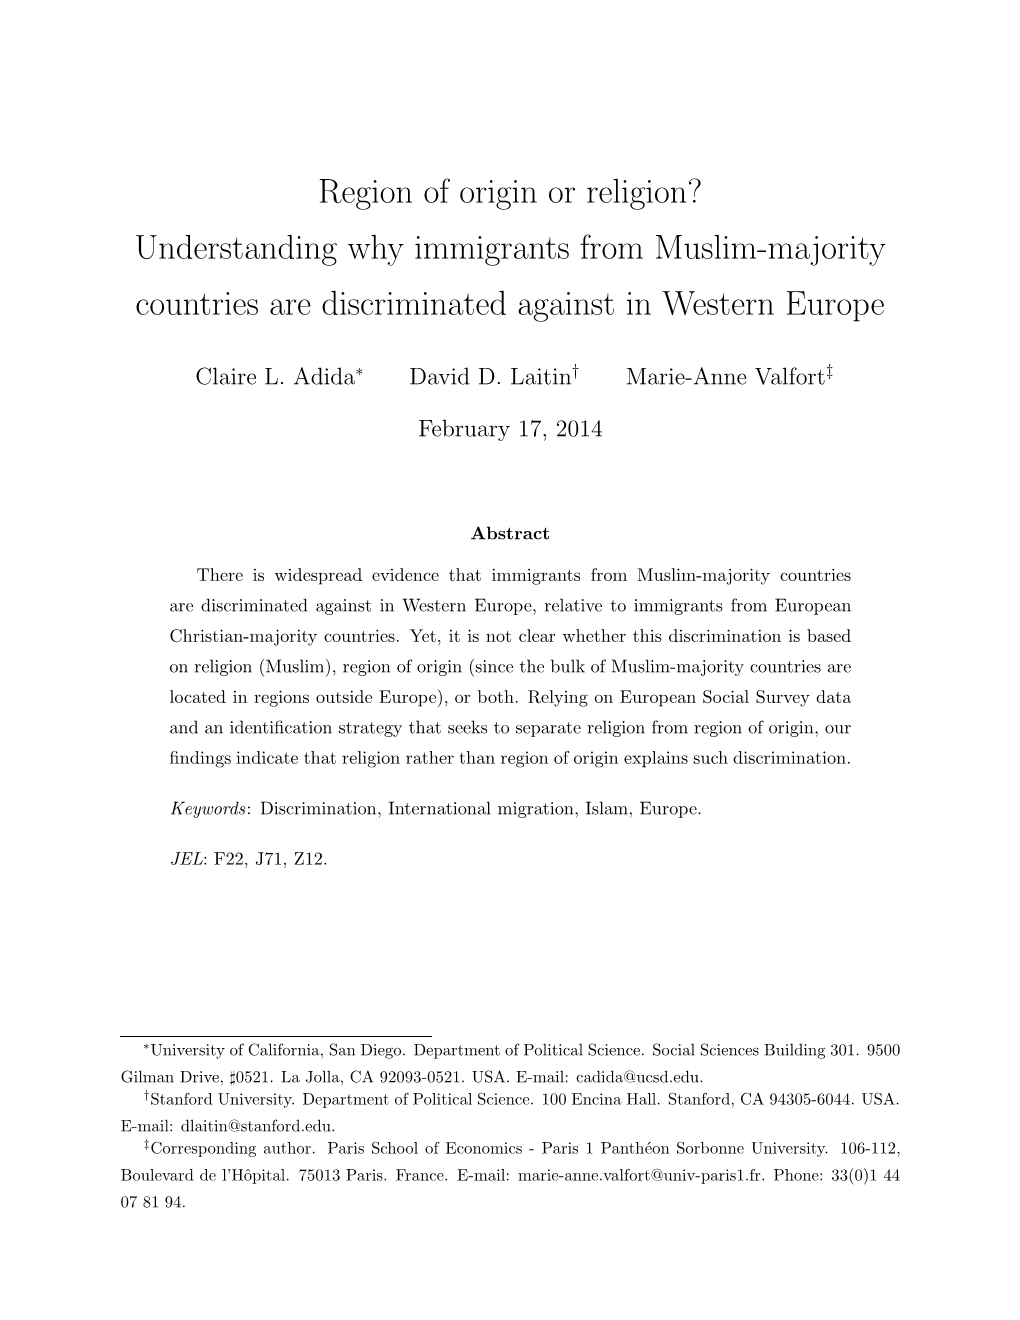 Region of Origin Or Religion? Understanding Why Immigrants from Muslim-Majority Countries Are Discriminated Against in Western Europe